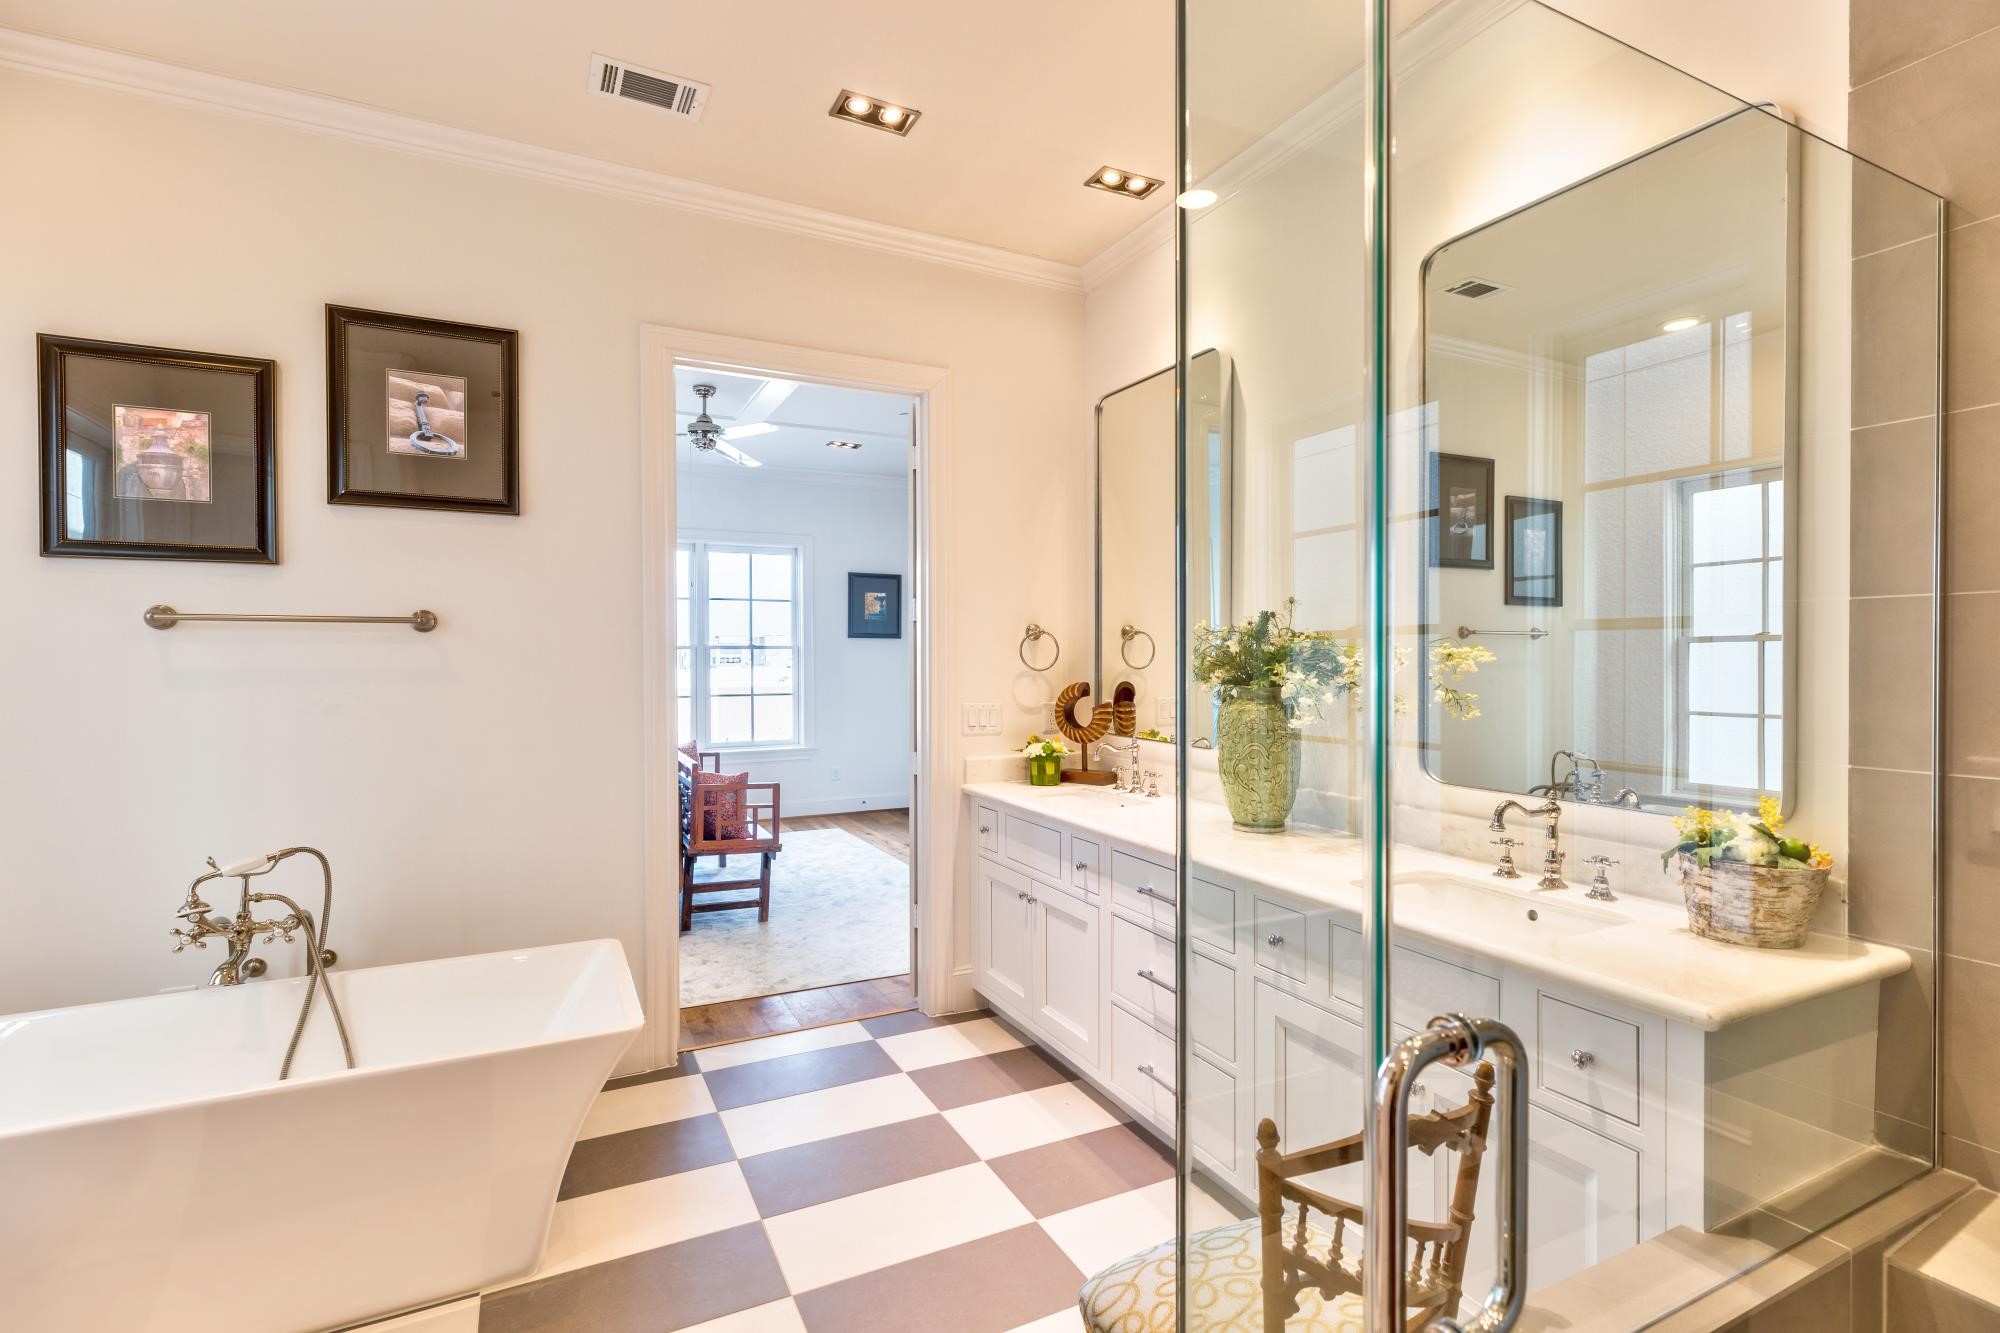 Personalize your en-suite primary bath with luxurious Rohl plumbing fixtures and chic marble floors.